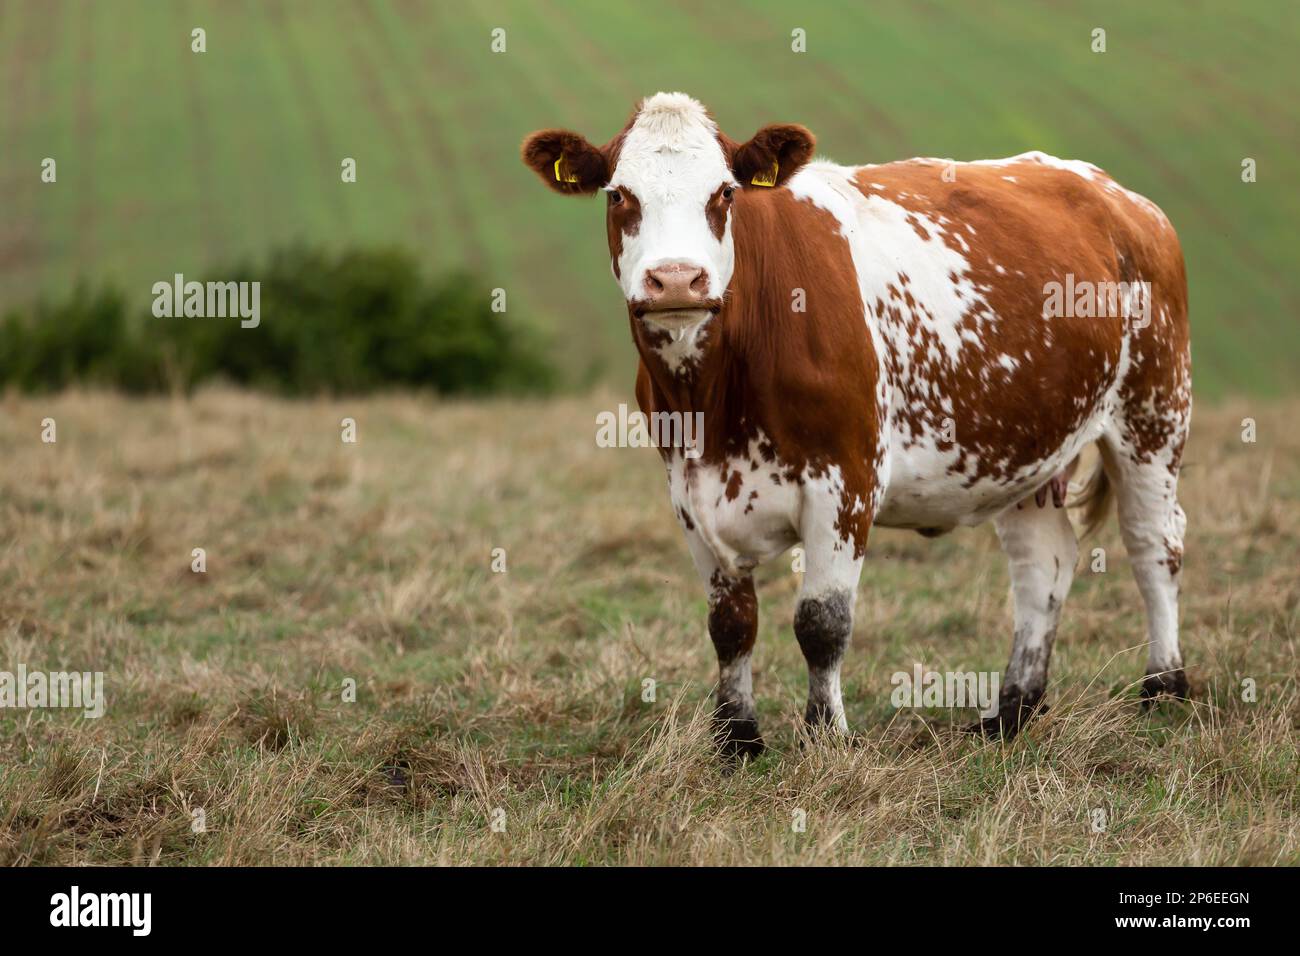 Close up of a red and white Ayrshire dairy cow, facing camera with head raised in summer pasture. Blurred background, North Yorkshire, UK. Horizontal. Stock Photo